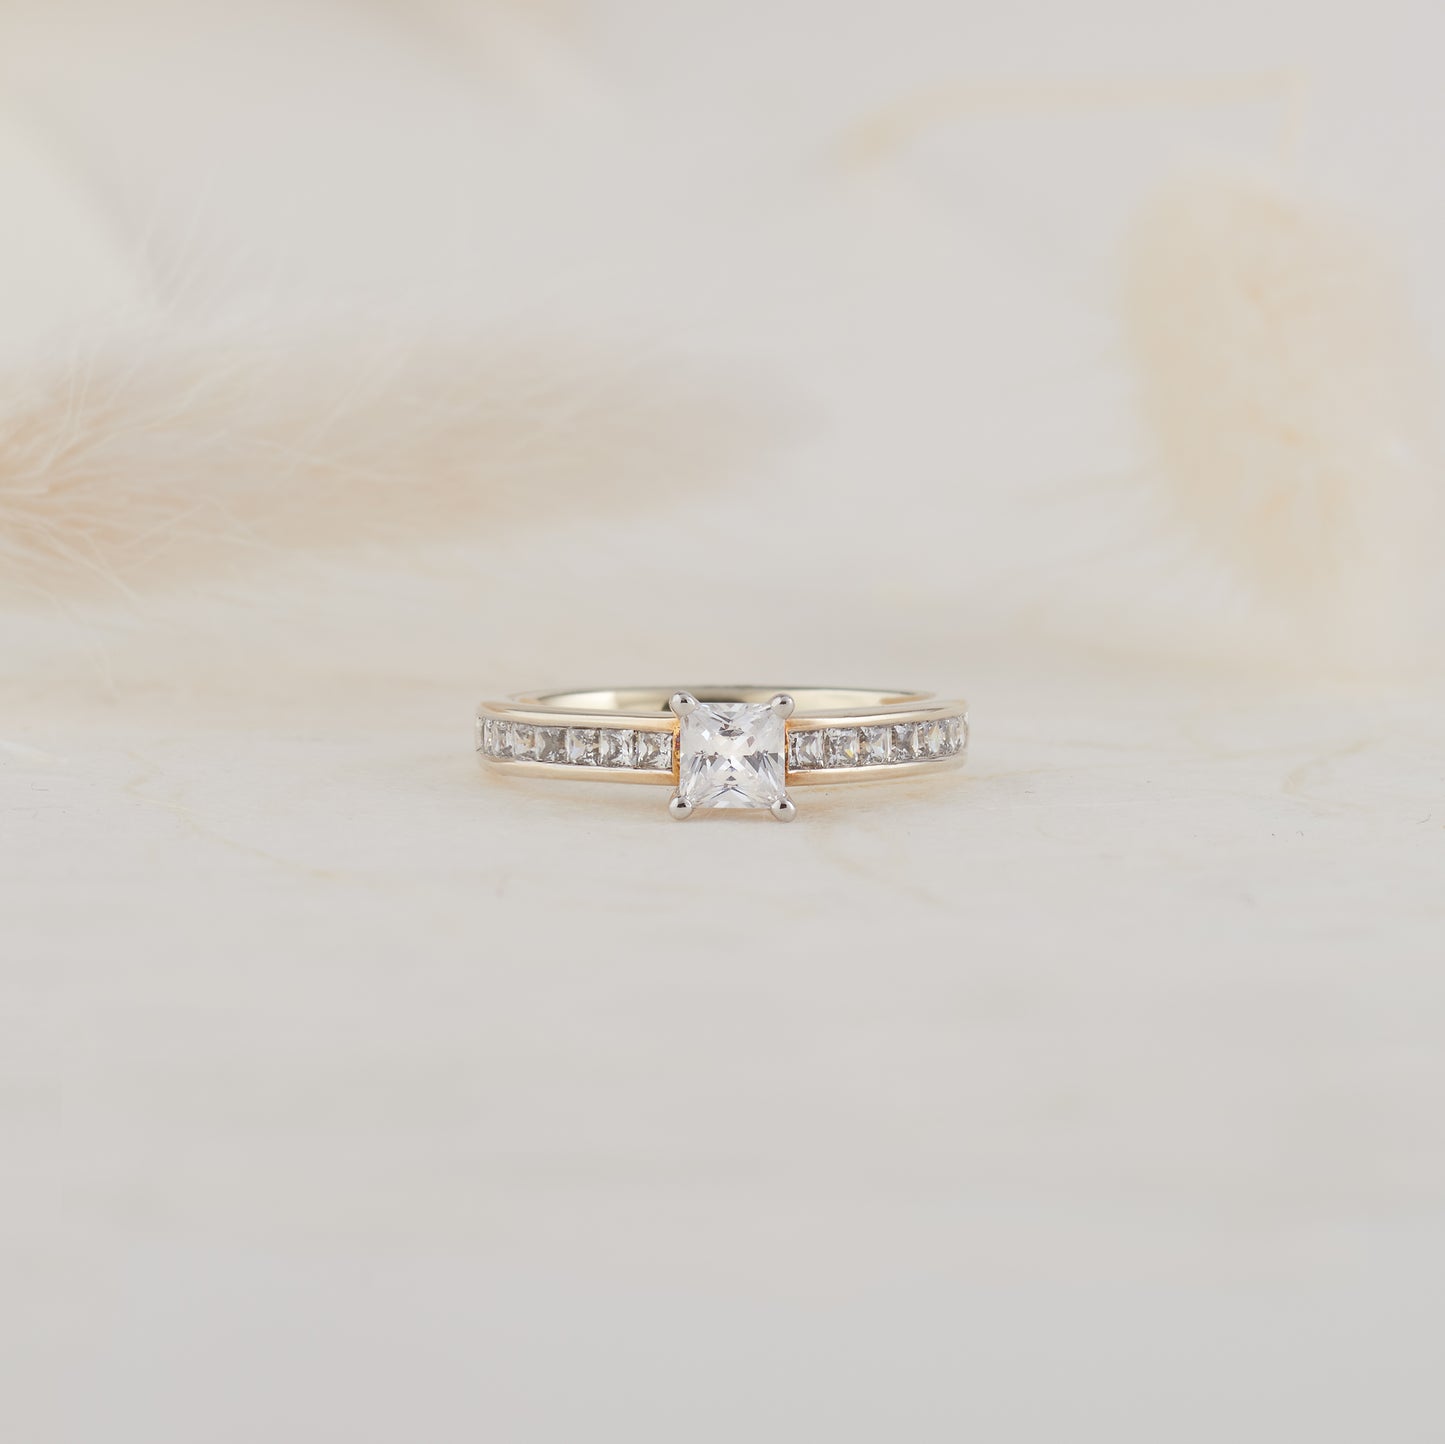 18K Yellow and White Gold Princess Cut Diamond Solitaire with Shoulder Accents Engagement Ring 1.0tdw